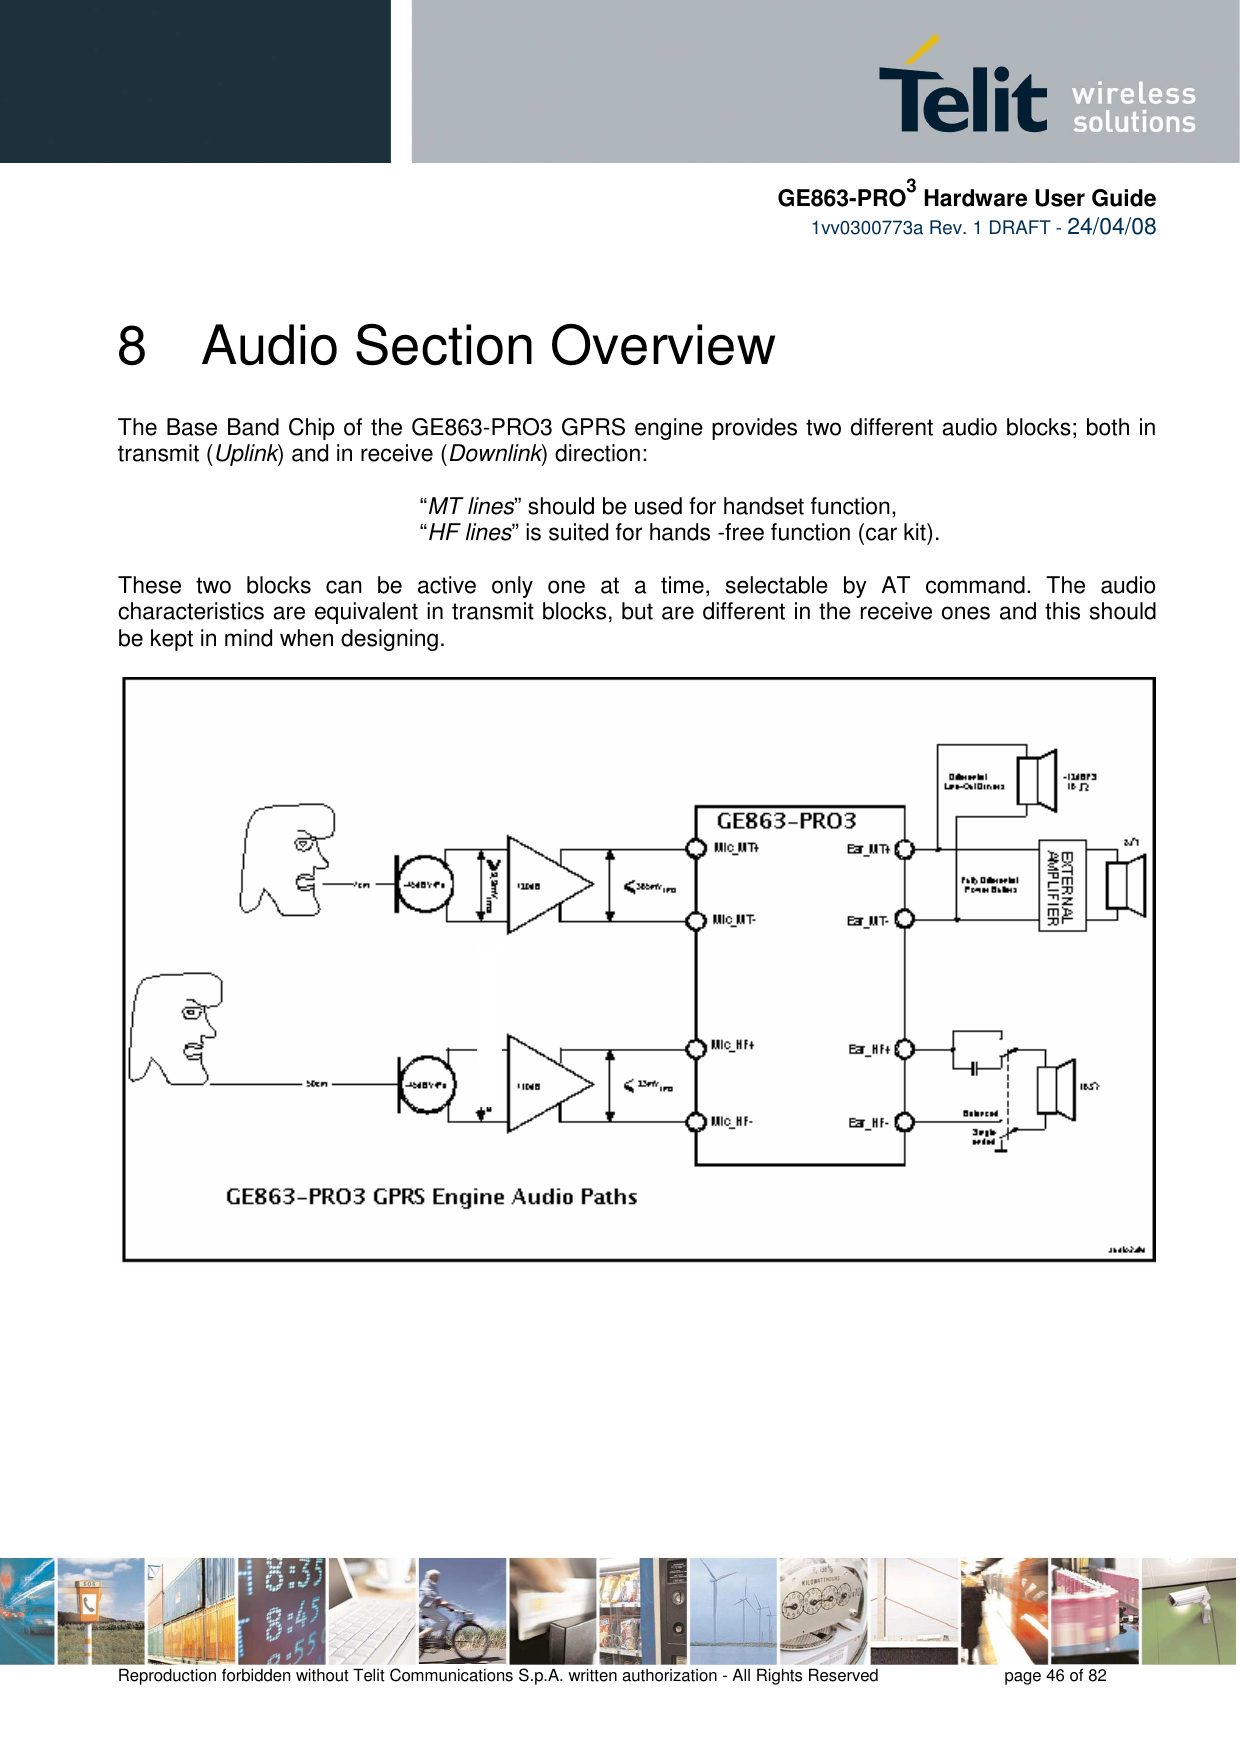     GE863-PRO3 Hardware User Guide  1vv0300773a Rev. 1 DRAFT - 24/04/08    Reproduction forbidden without Telit Communications S.p.A. written authorization - All Rights Reserved    page 46 of 82  8  Audio Section Overview The Base Band Chip of the GE863-PRO3 GPRS engine provides two different audio blocks; both in transmit (Uplink) and in receive (Downlink) direction:   “MT lines” should be used for handset function,   “HF lines” is suited for hands -free function (car kit).  These  two  blocks  can  be  active  only  one  at  a  time,  selectable  by  AT  command.  The  audio characteristics are equivalent in transmit blocks, but are different in the receive ones and this should be kept in mind when designing.     